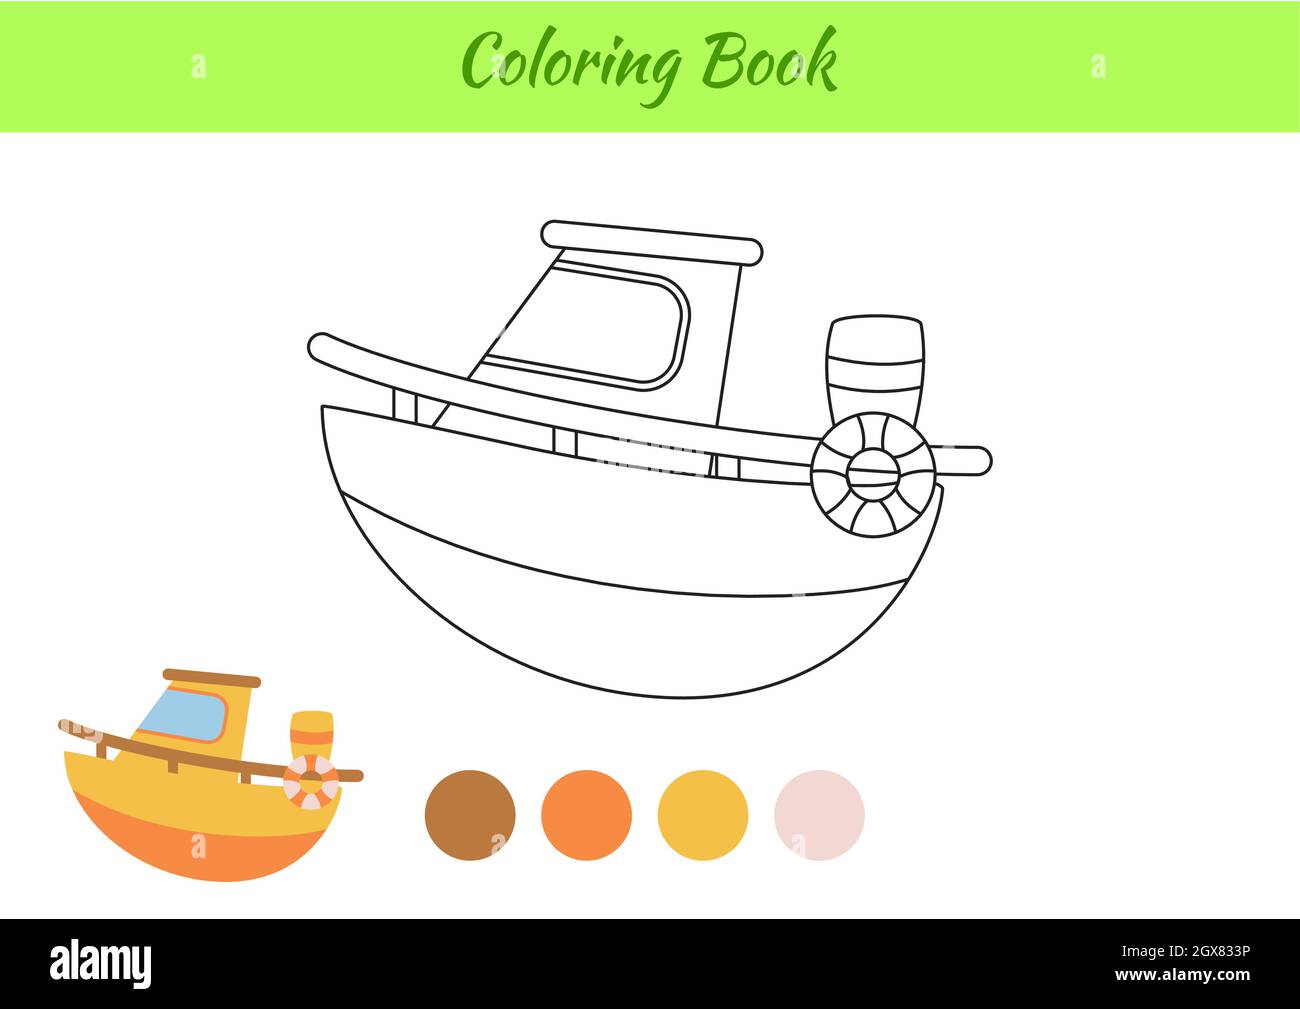 Coloring book ship for children educational activity page for preschool years kids and toddlers with transport printable worksheet cartoon colorful stock vector image art